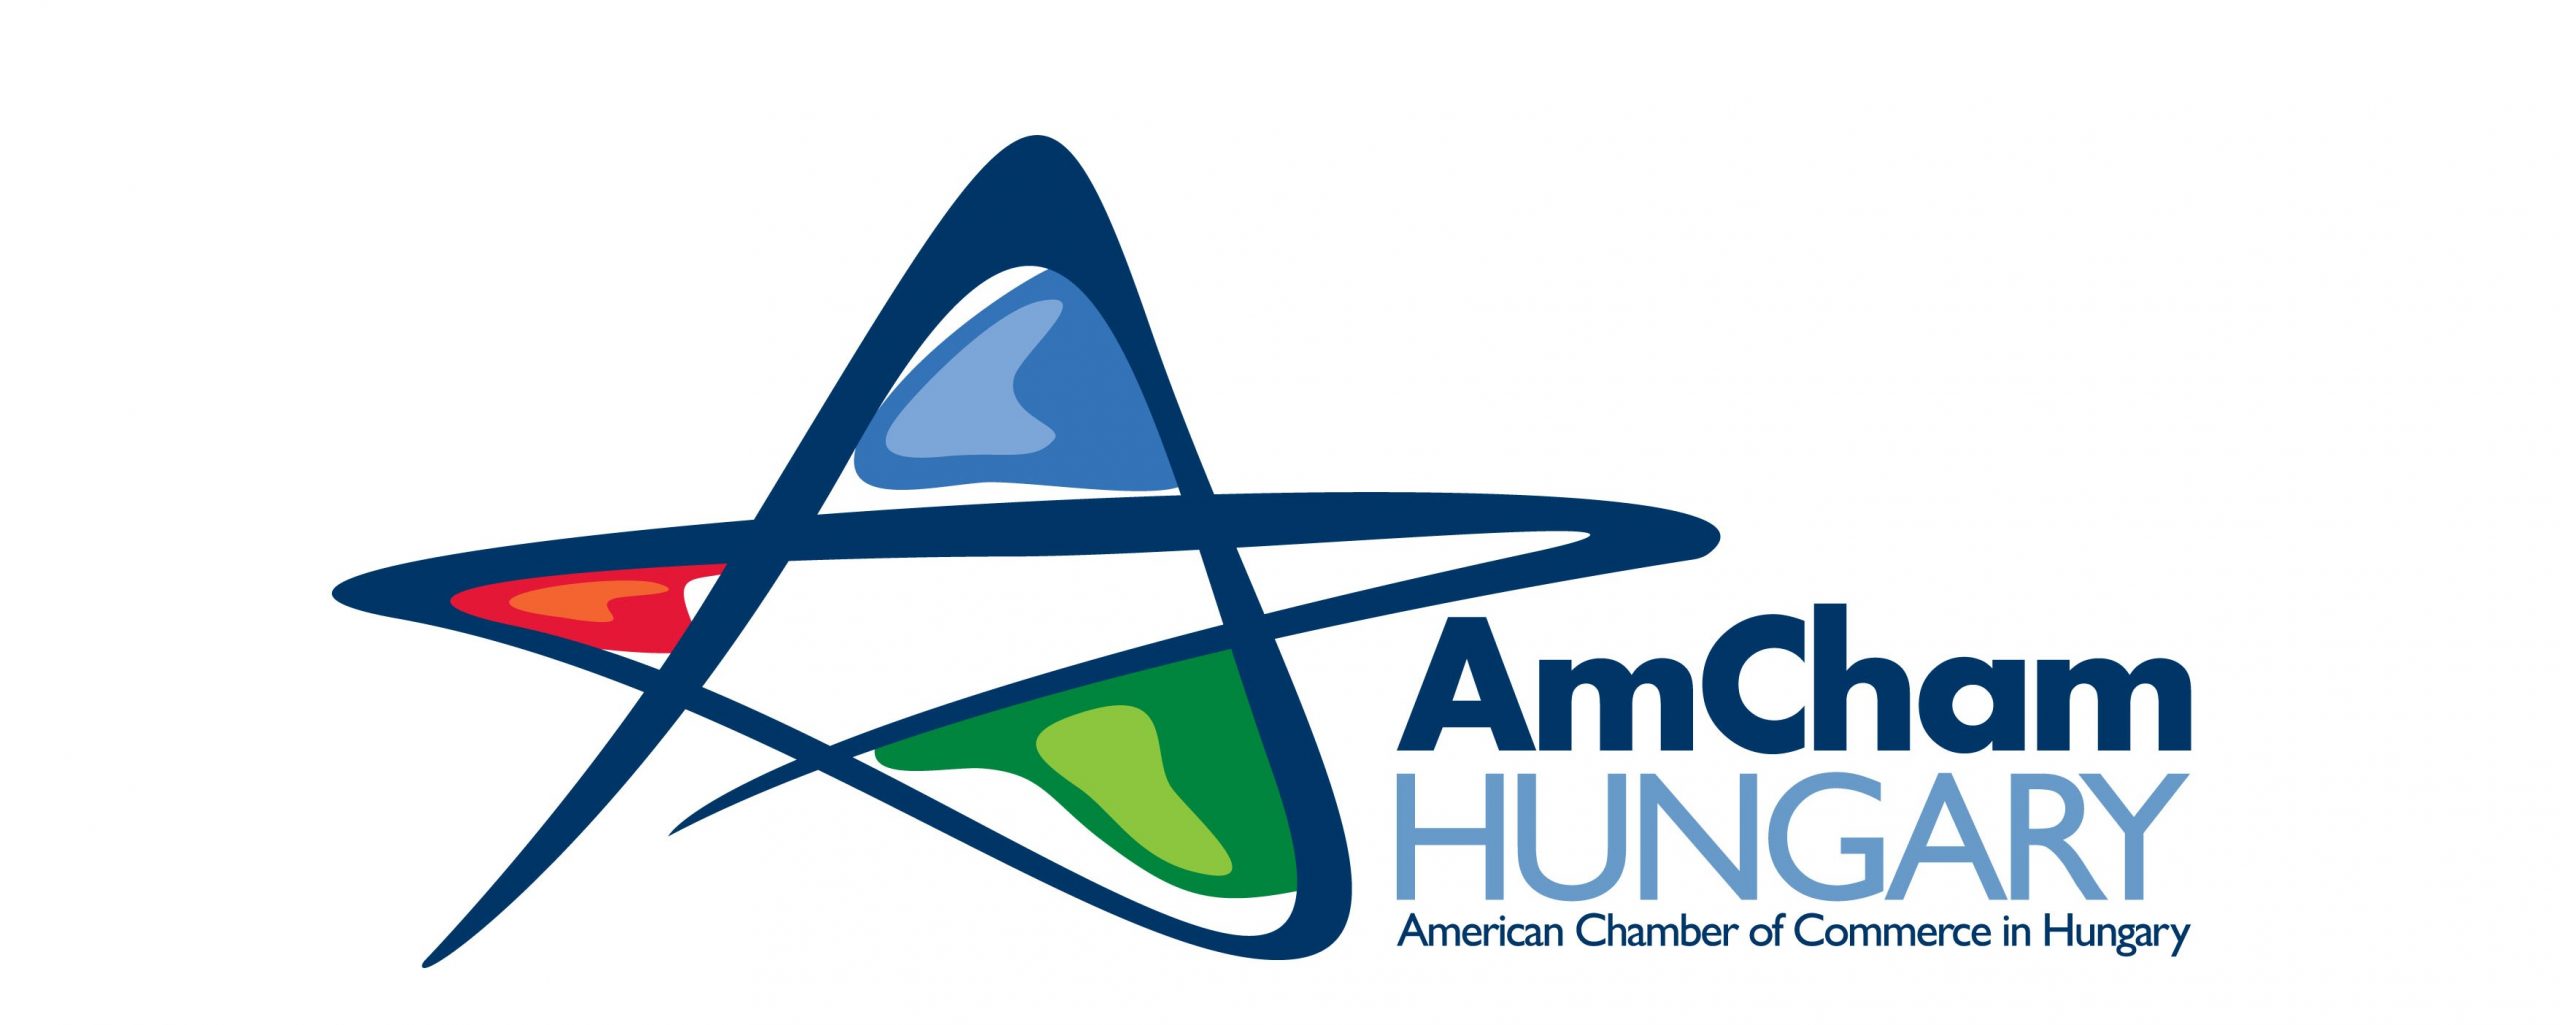 AMCHAM –American Chamber of Commerce in Hungary